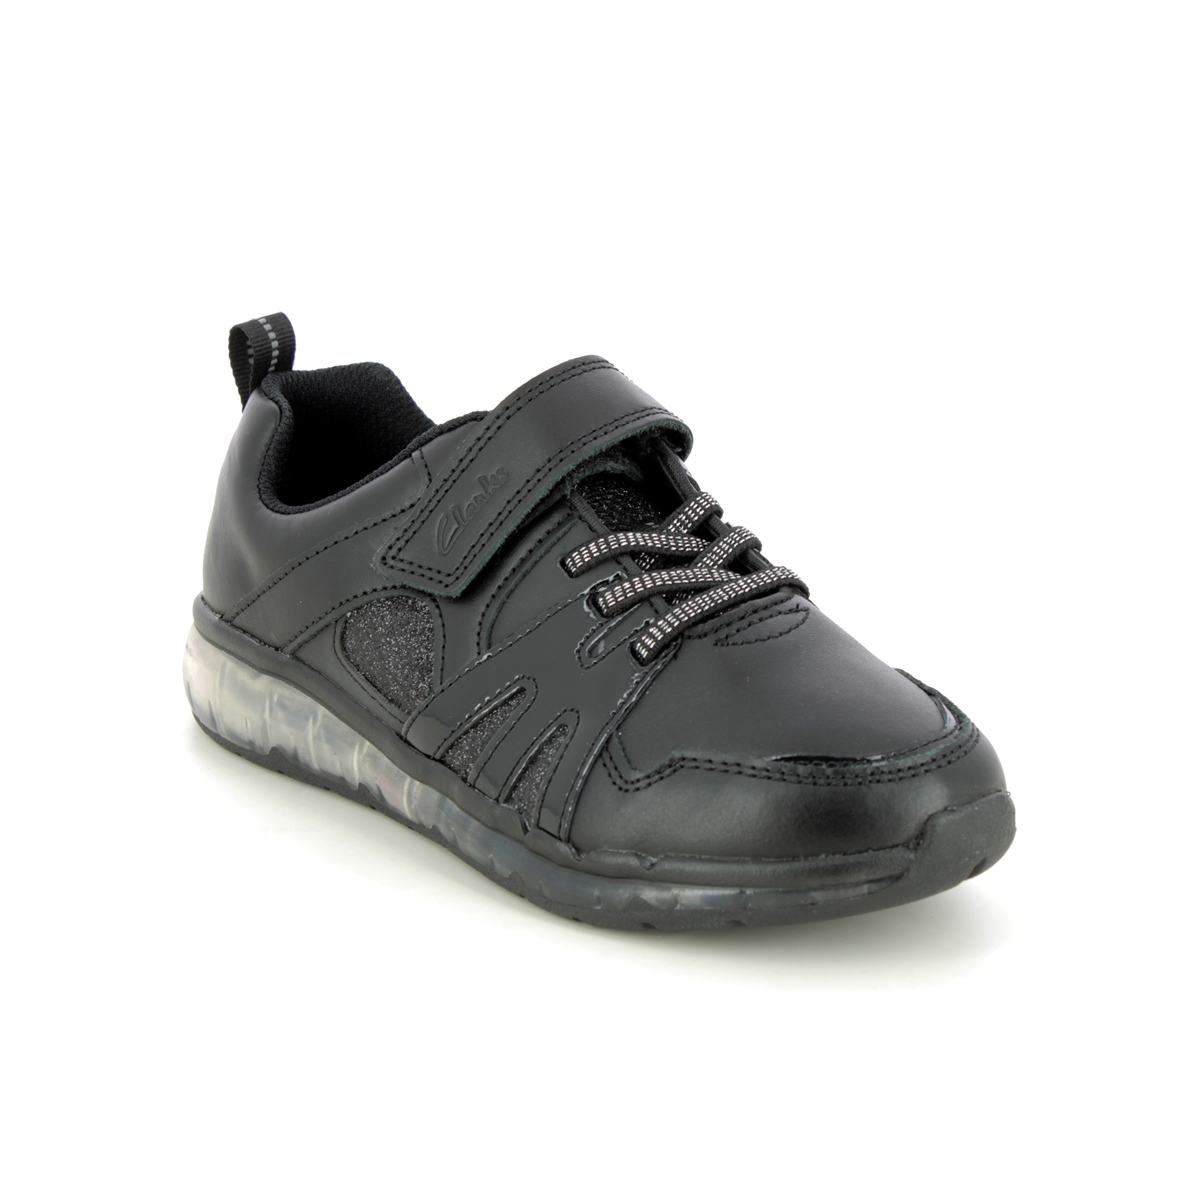 Clarks Spark Glow O Black Leather Kids Girls School Shoes 686637G In Size 3 In Plain Black Leather G Width Fitting For School For kids